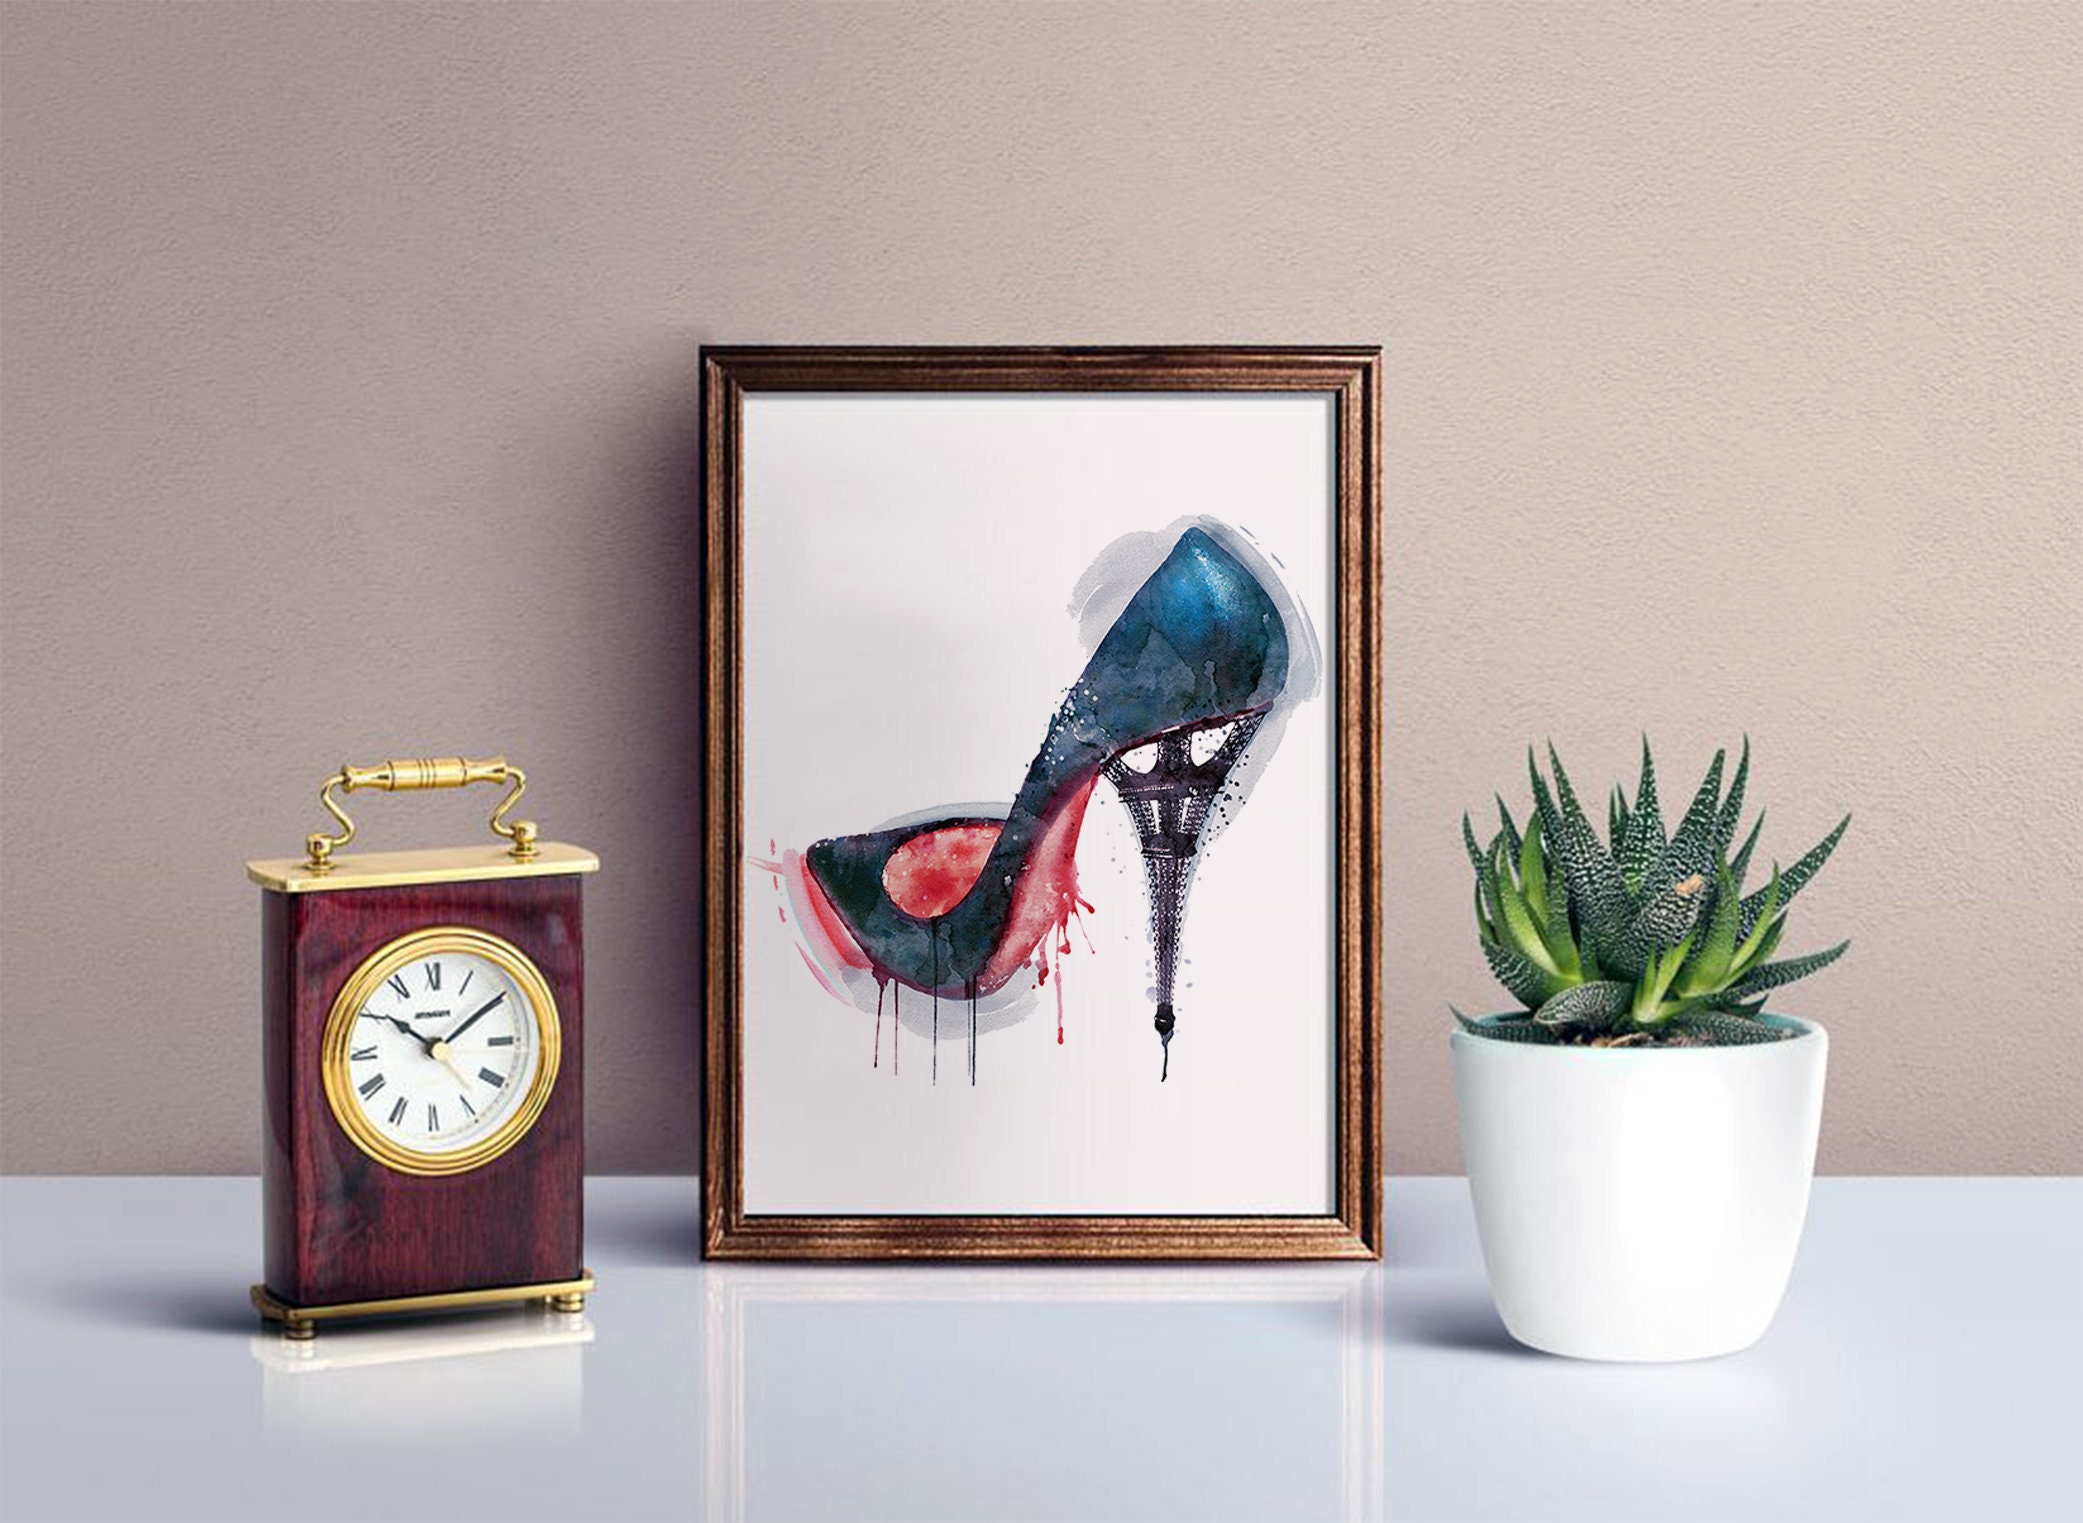 Eiffel Tower High Heel Shoe Watercolor Painting Instant | Etsy